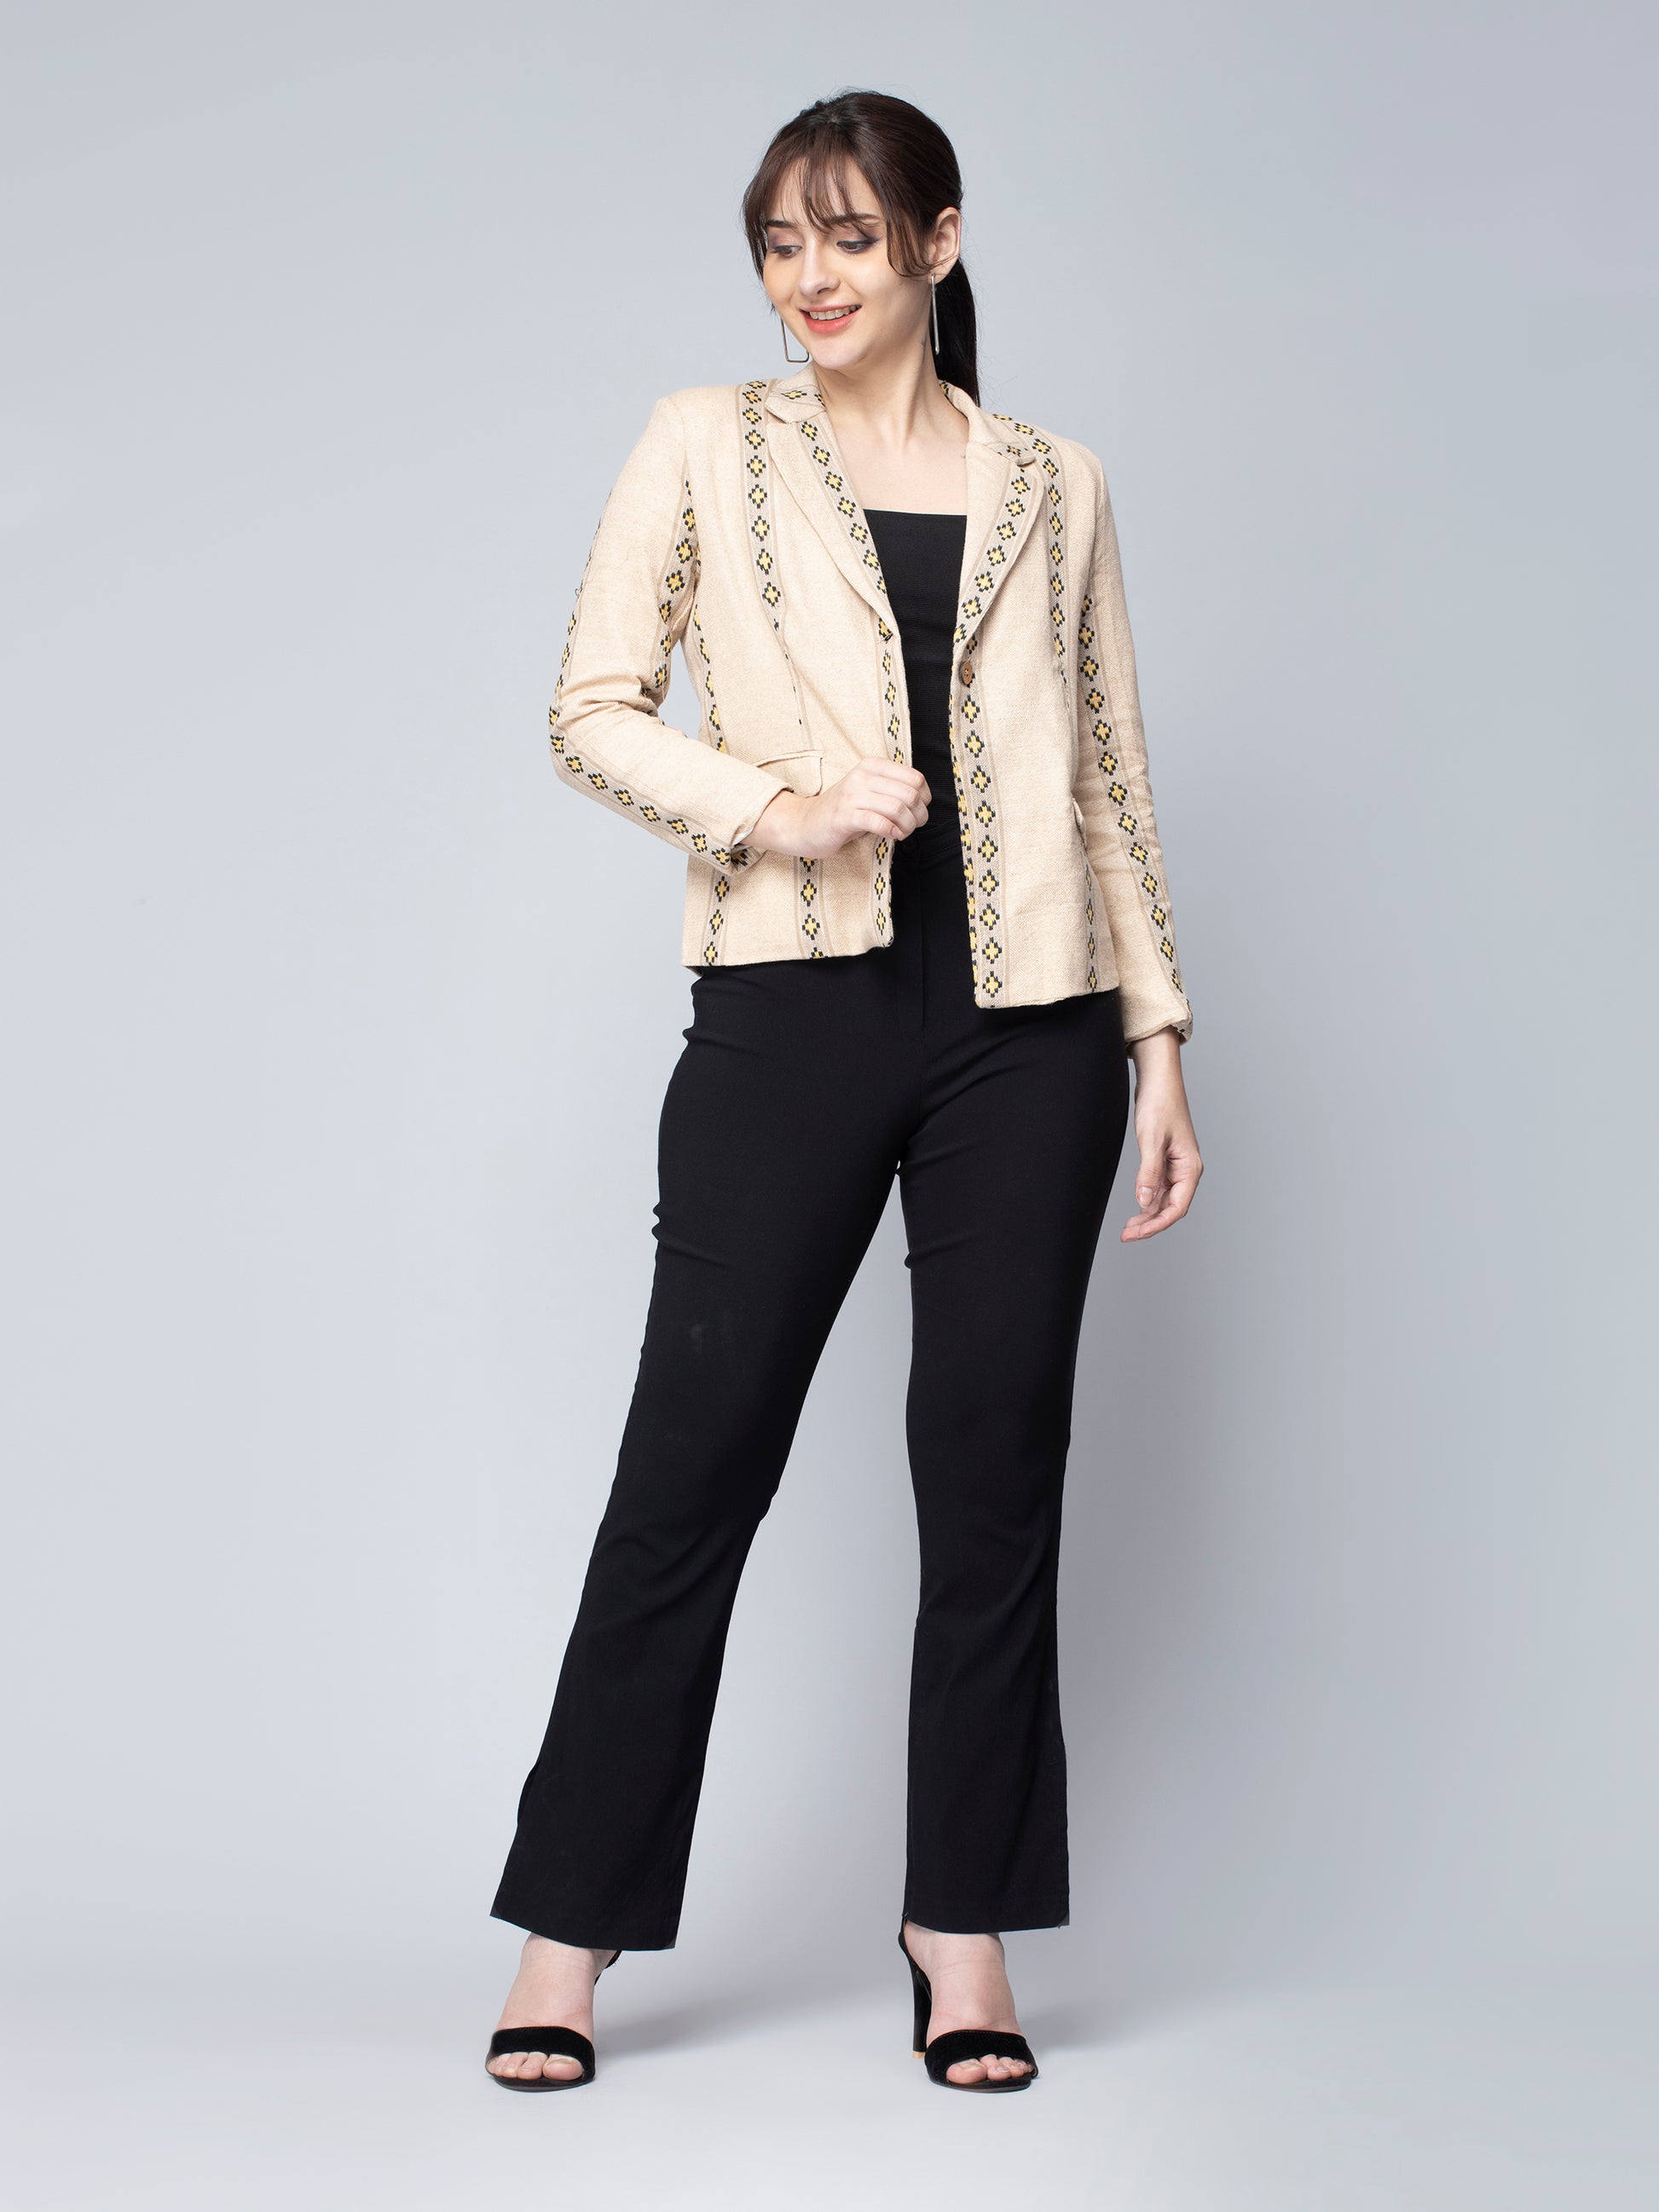 A picture of Beige & Yellow Jute Blazer, womens workwear standing against a grey background looking sideways